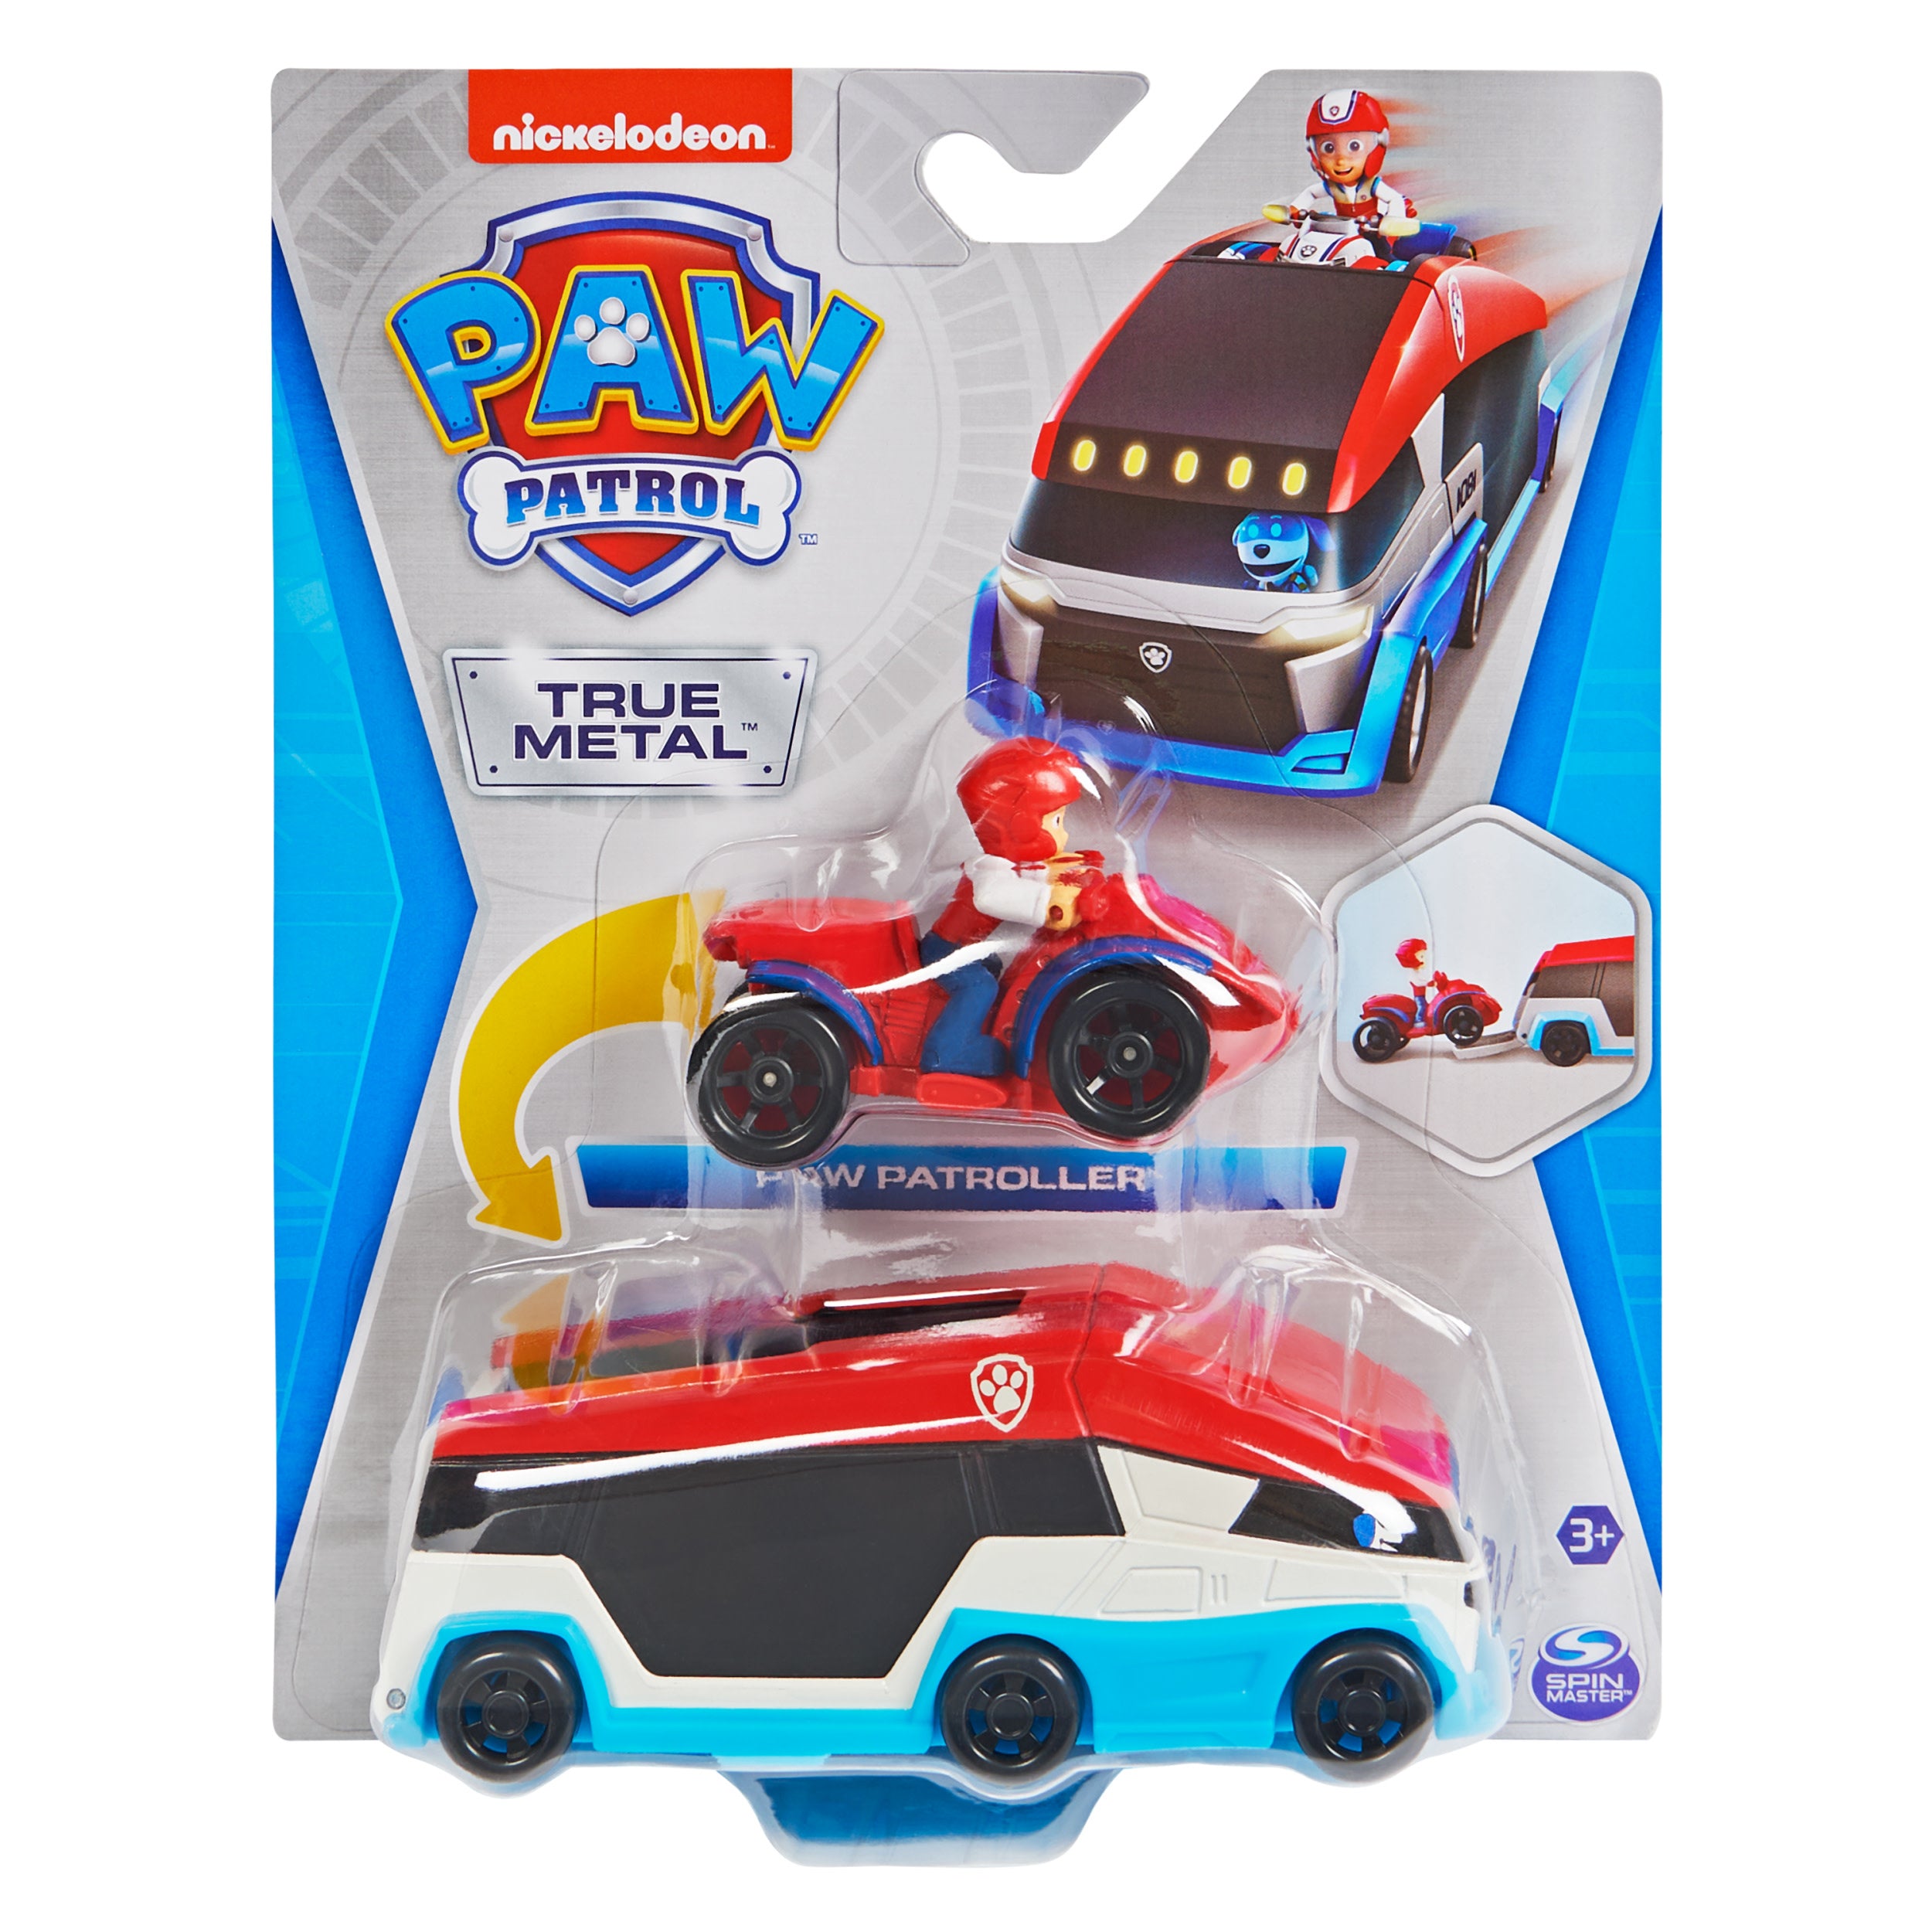 Spin Master - PAW Patrol True Metal PAW Patroller Die-Cast Team Vehicle with 1:55 Scale Ryder ATV Toy Car